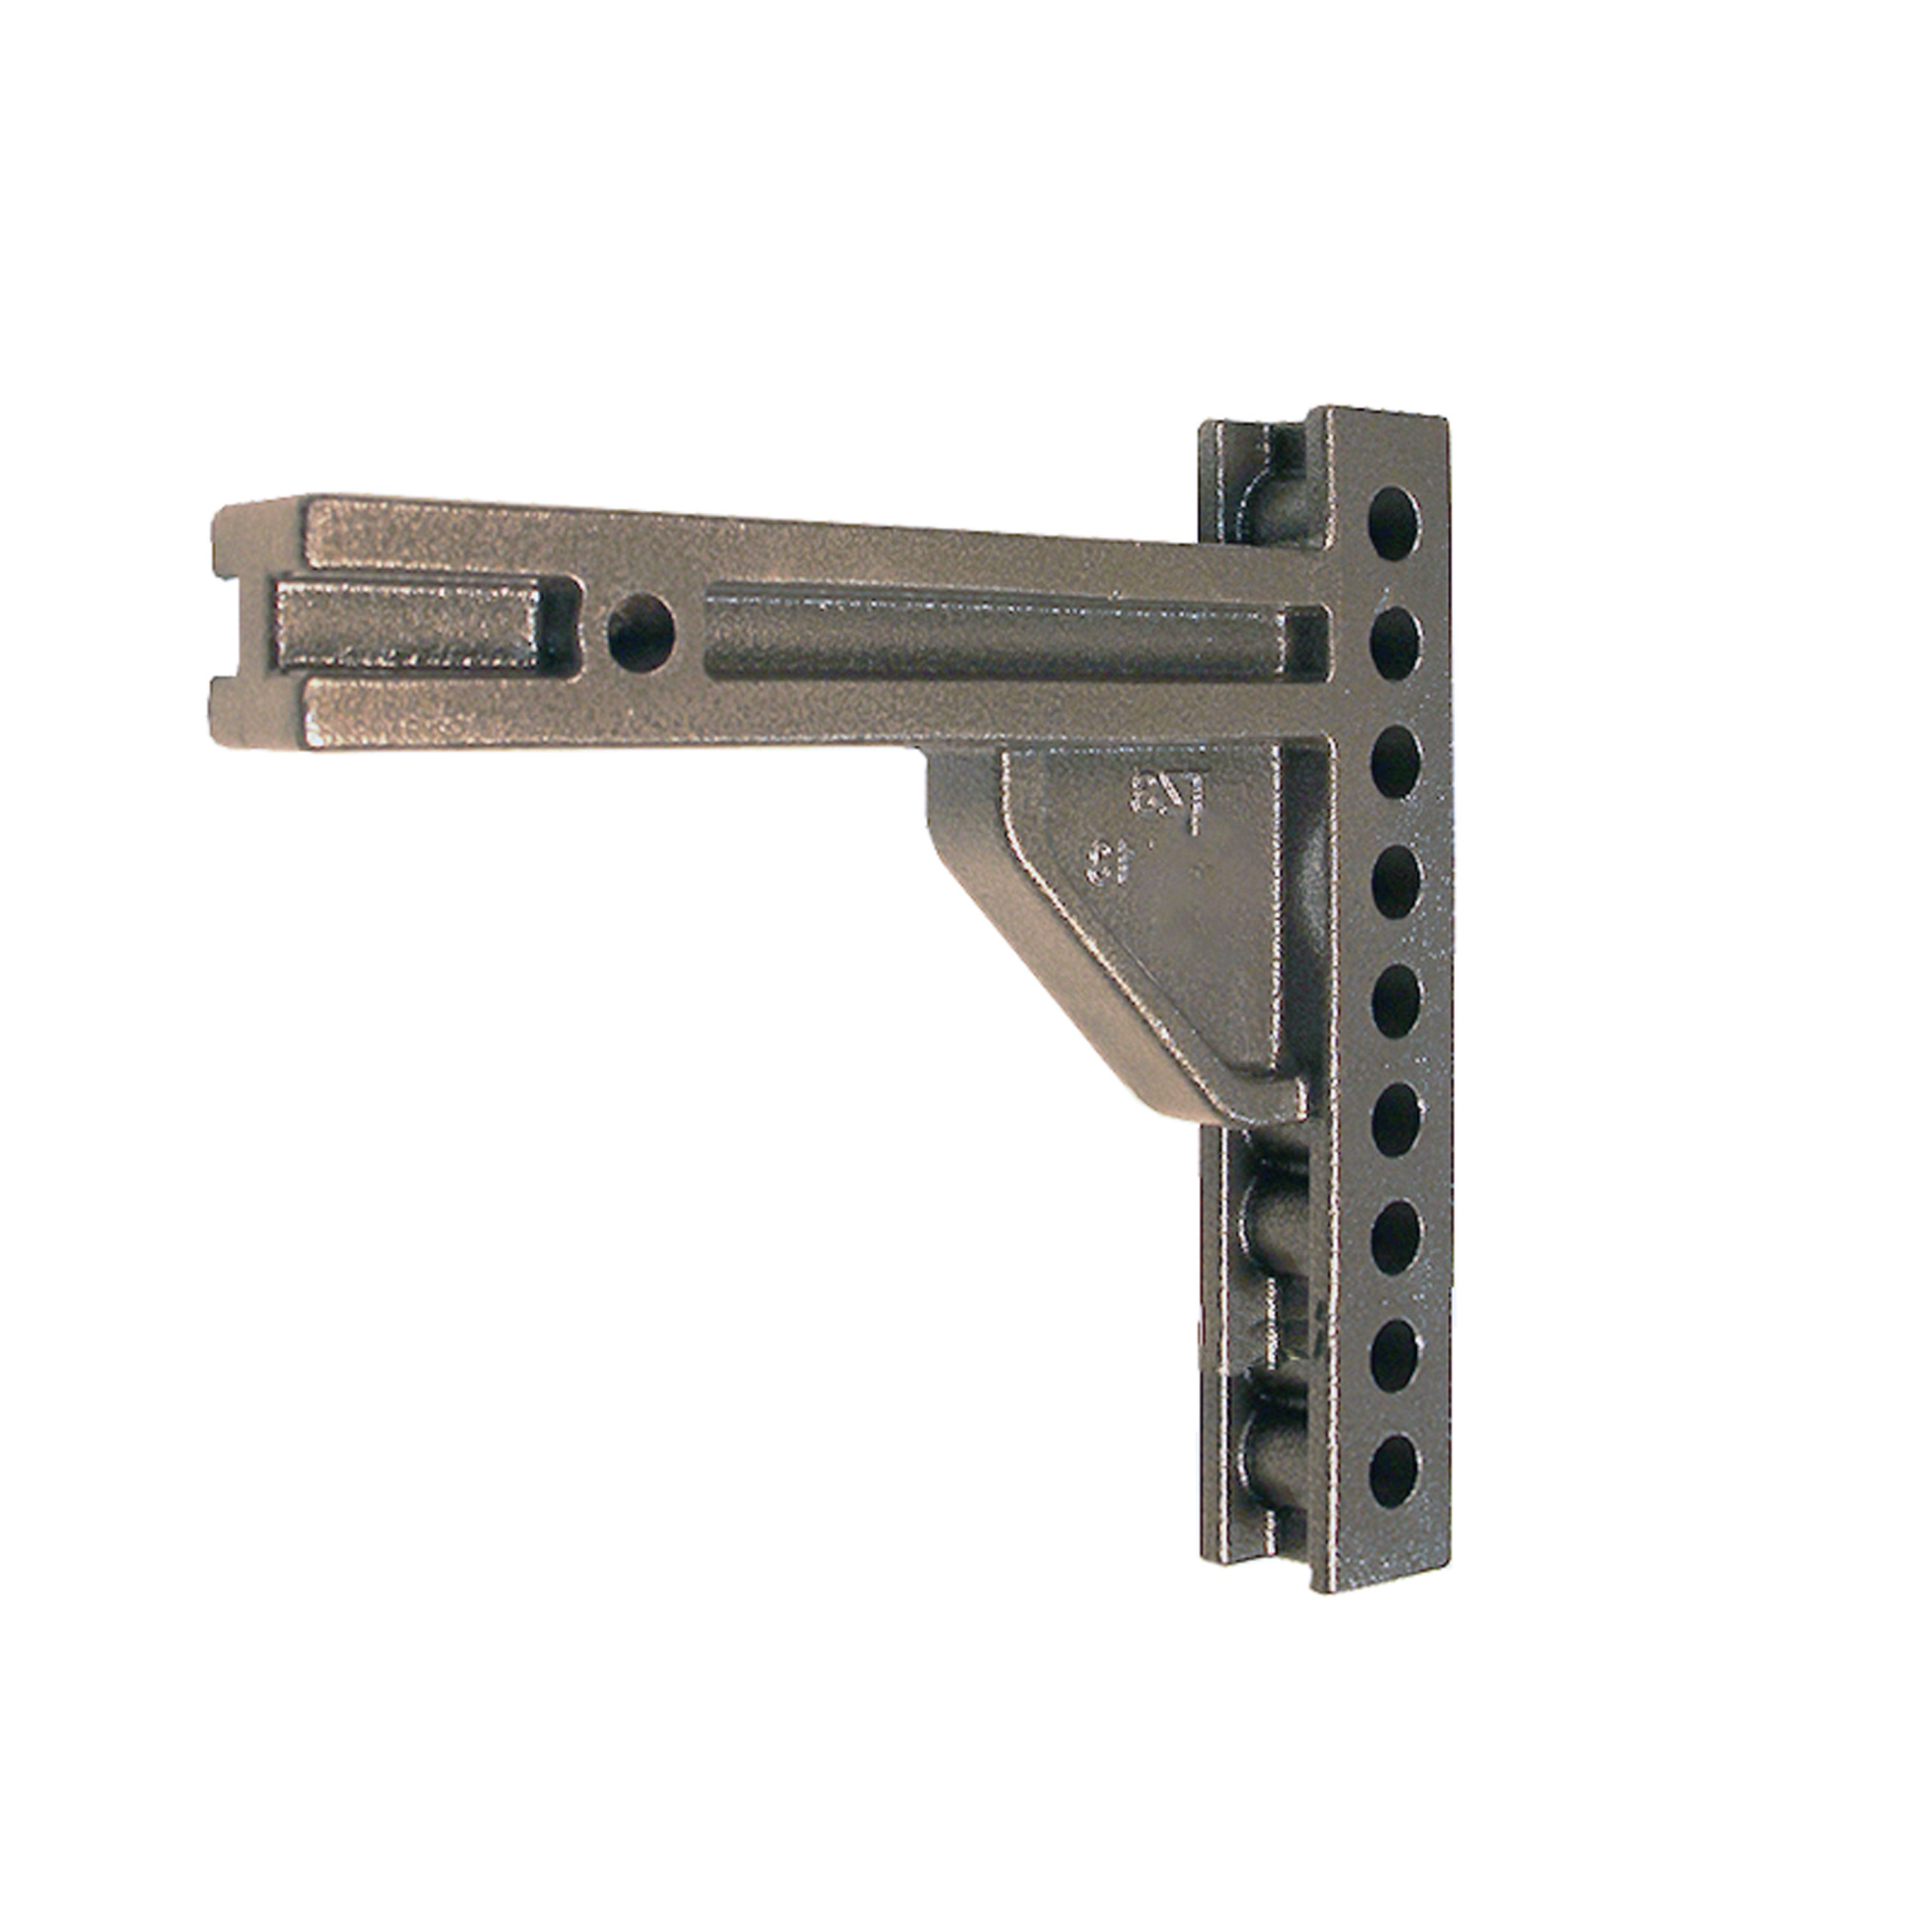 Blue Ox BXW0756 SwayPro Weight Distributing Hitch with 11 Hole Shank - 750 lb. TW